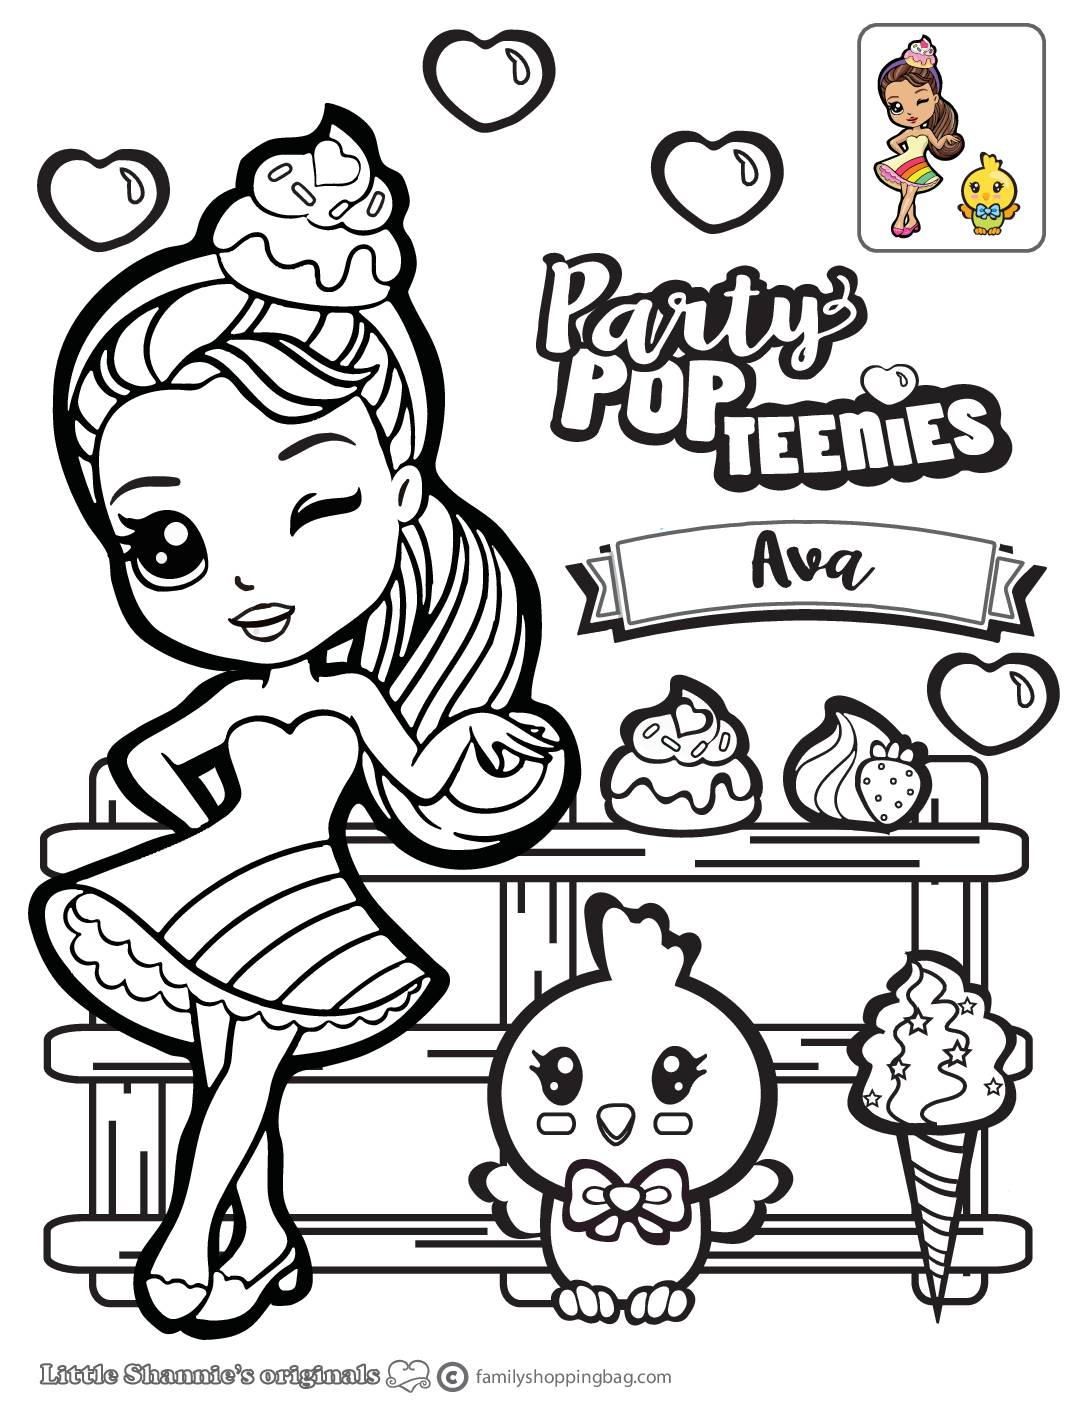 Ava Coloring Page Party Pop Teenies Coloring Pages